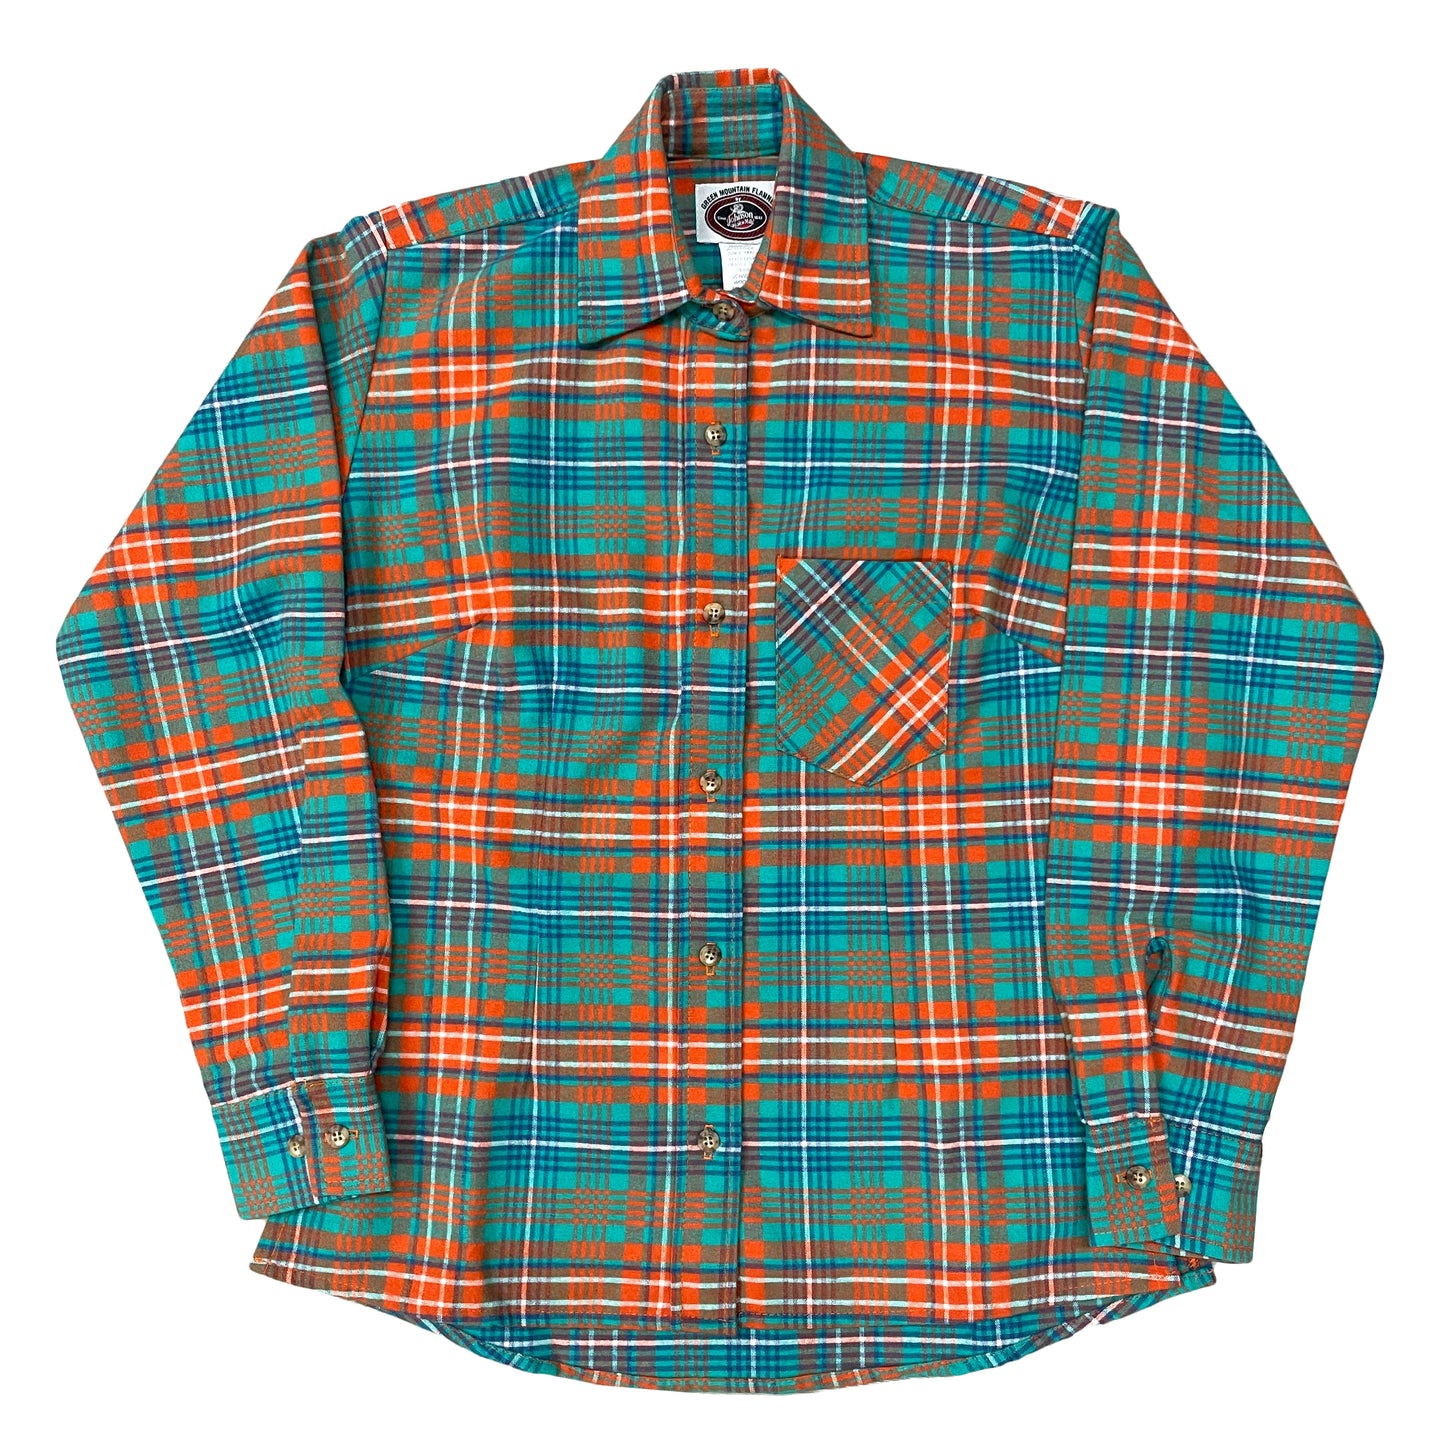 Green Mountain Flannel long sleeve button down shirt with 1 chest pocket, long tail and button cuffs. Shown in teal, orange, light blue and white plaid.